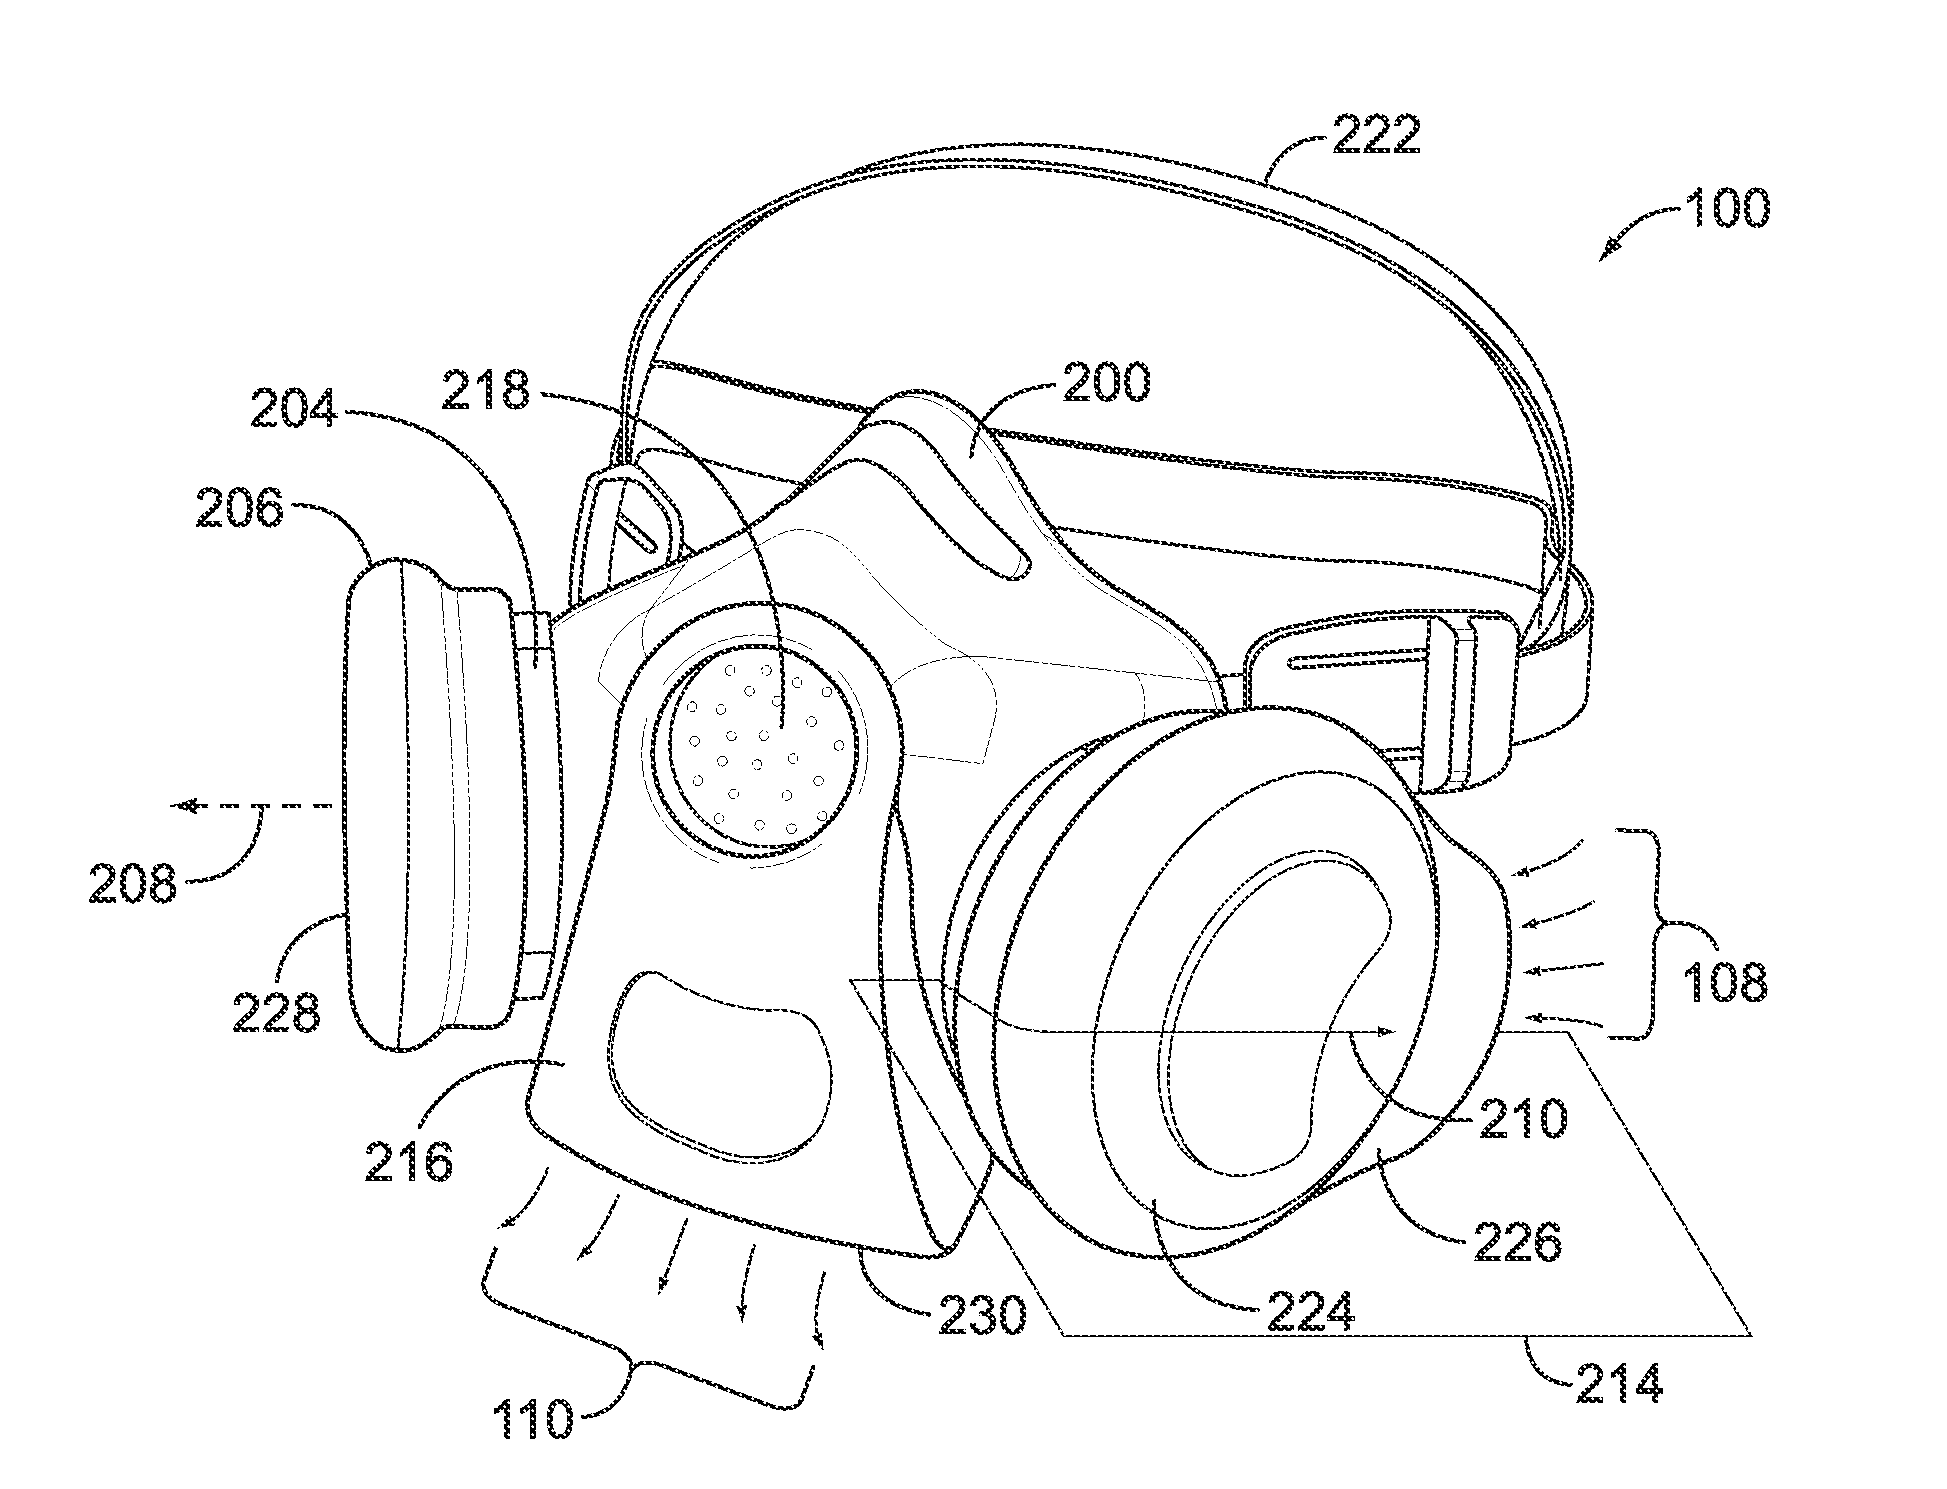 Air purifying respirator having inhalation and exhalation ducts to reduce rate of pathogen transmission